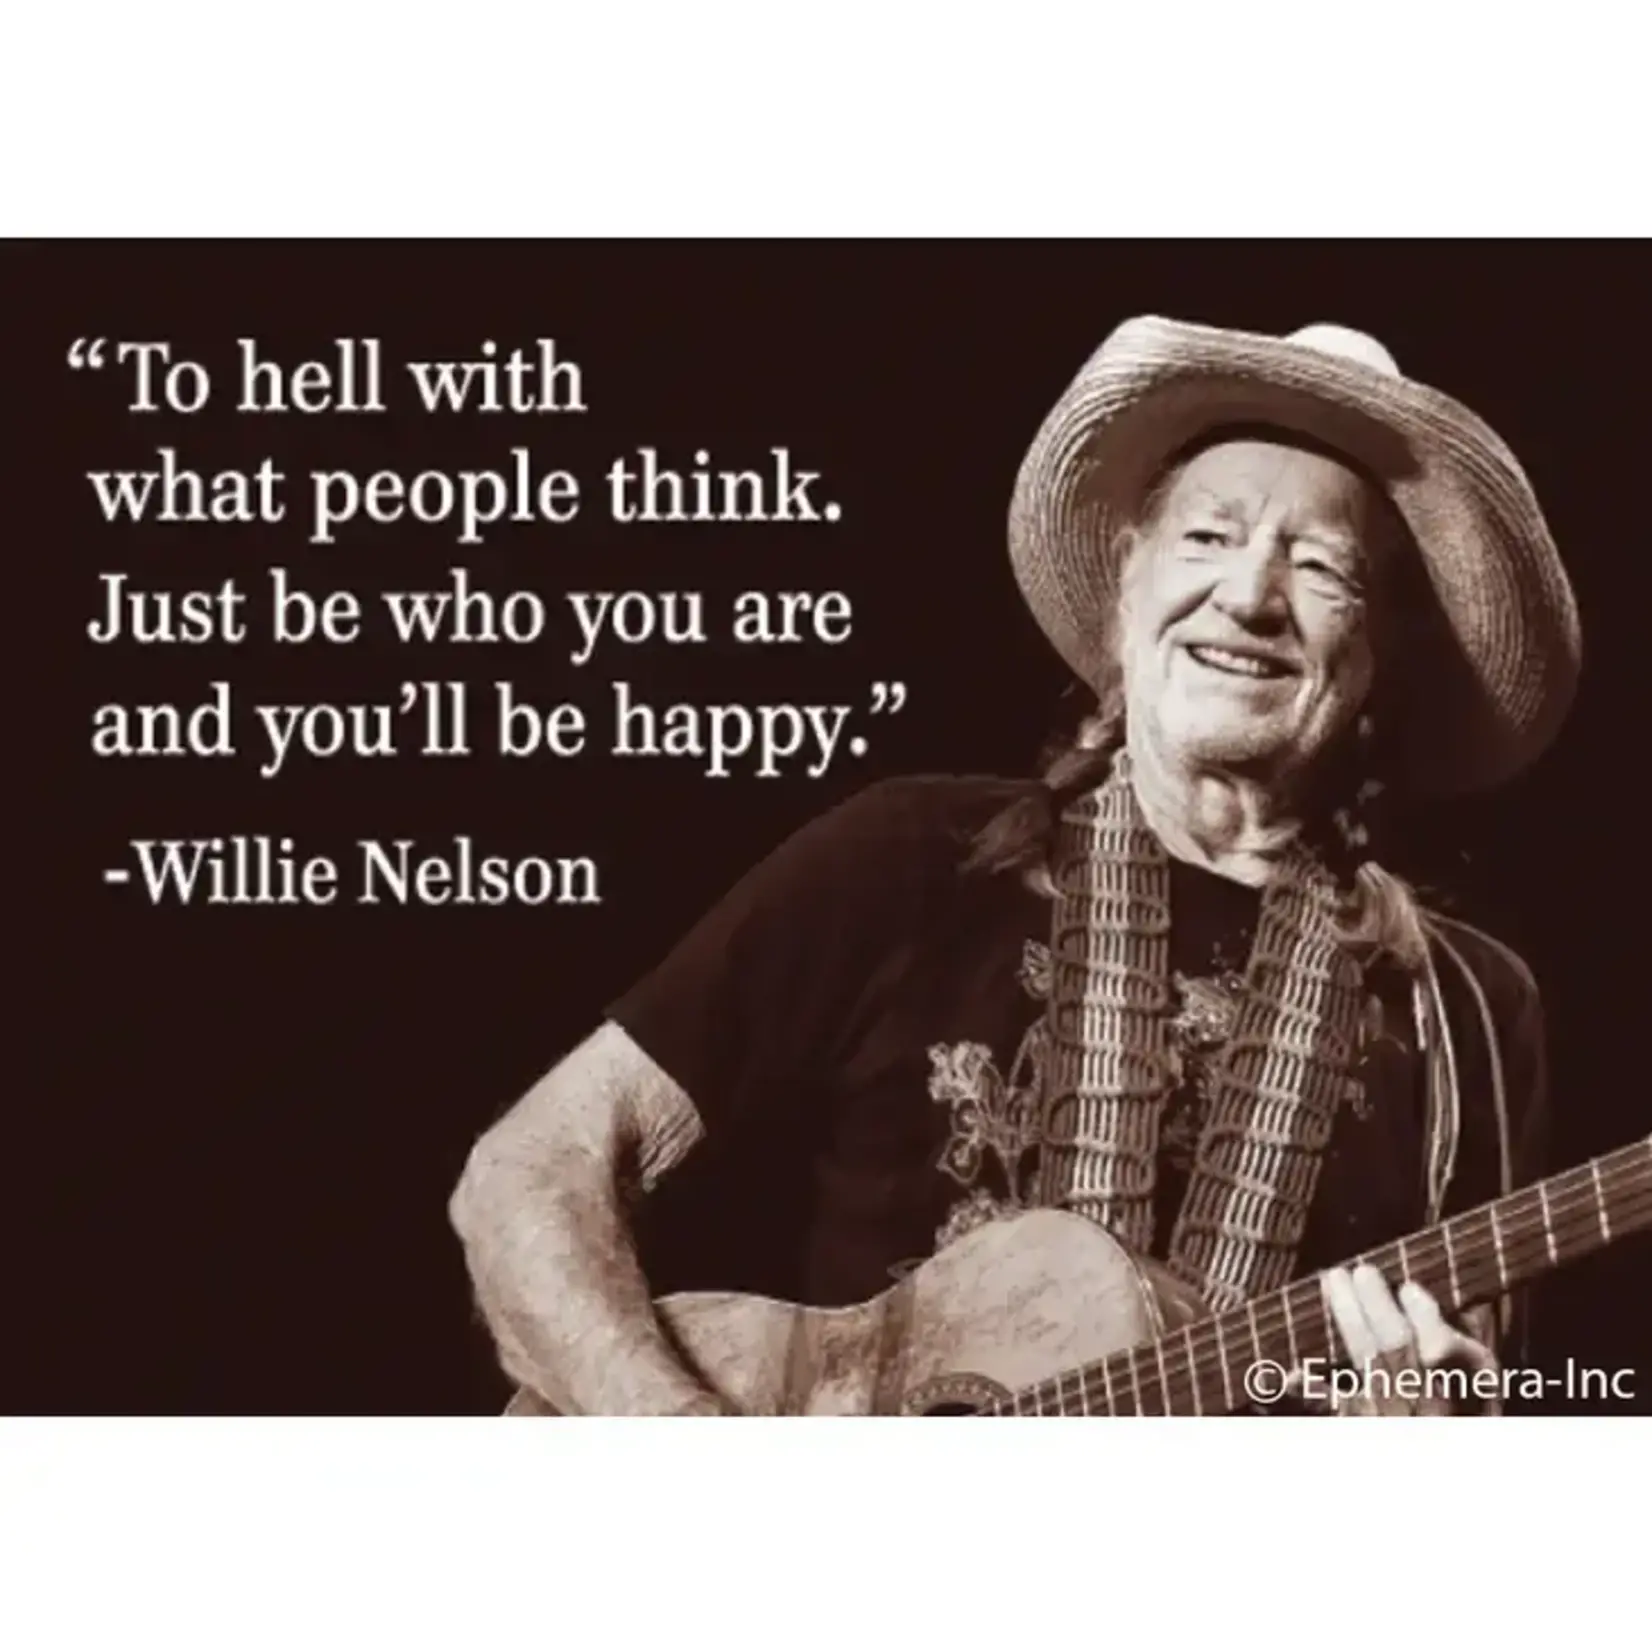 Magnet - Willie Nelson: "To Hell With What People Think. Just Be Who You Are and You'll Be Happy."